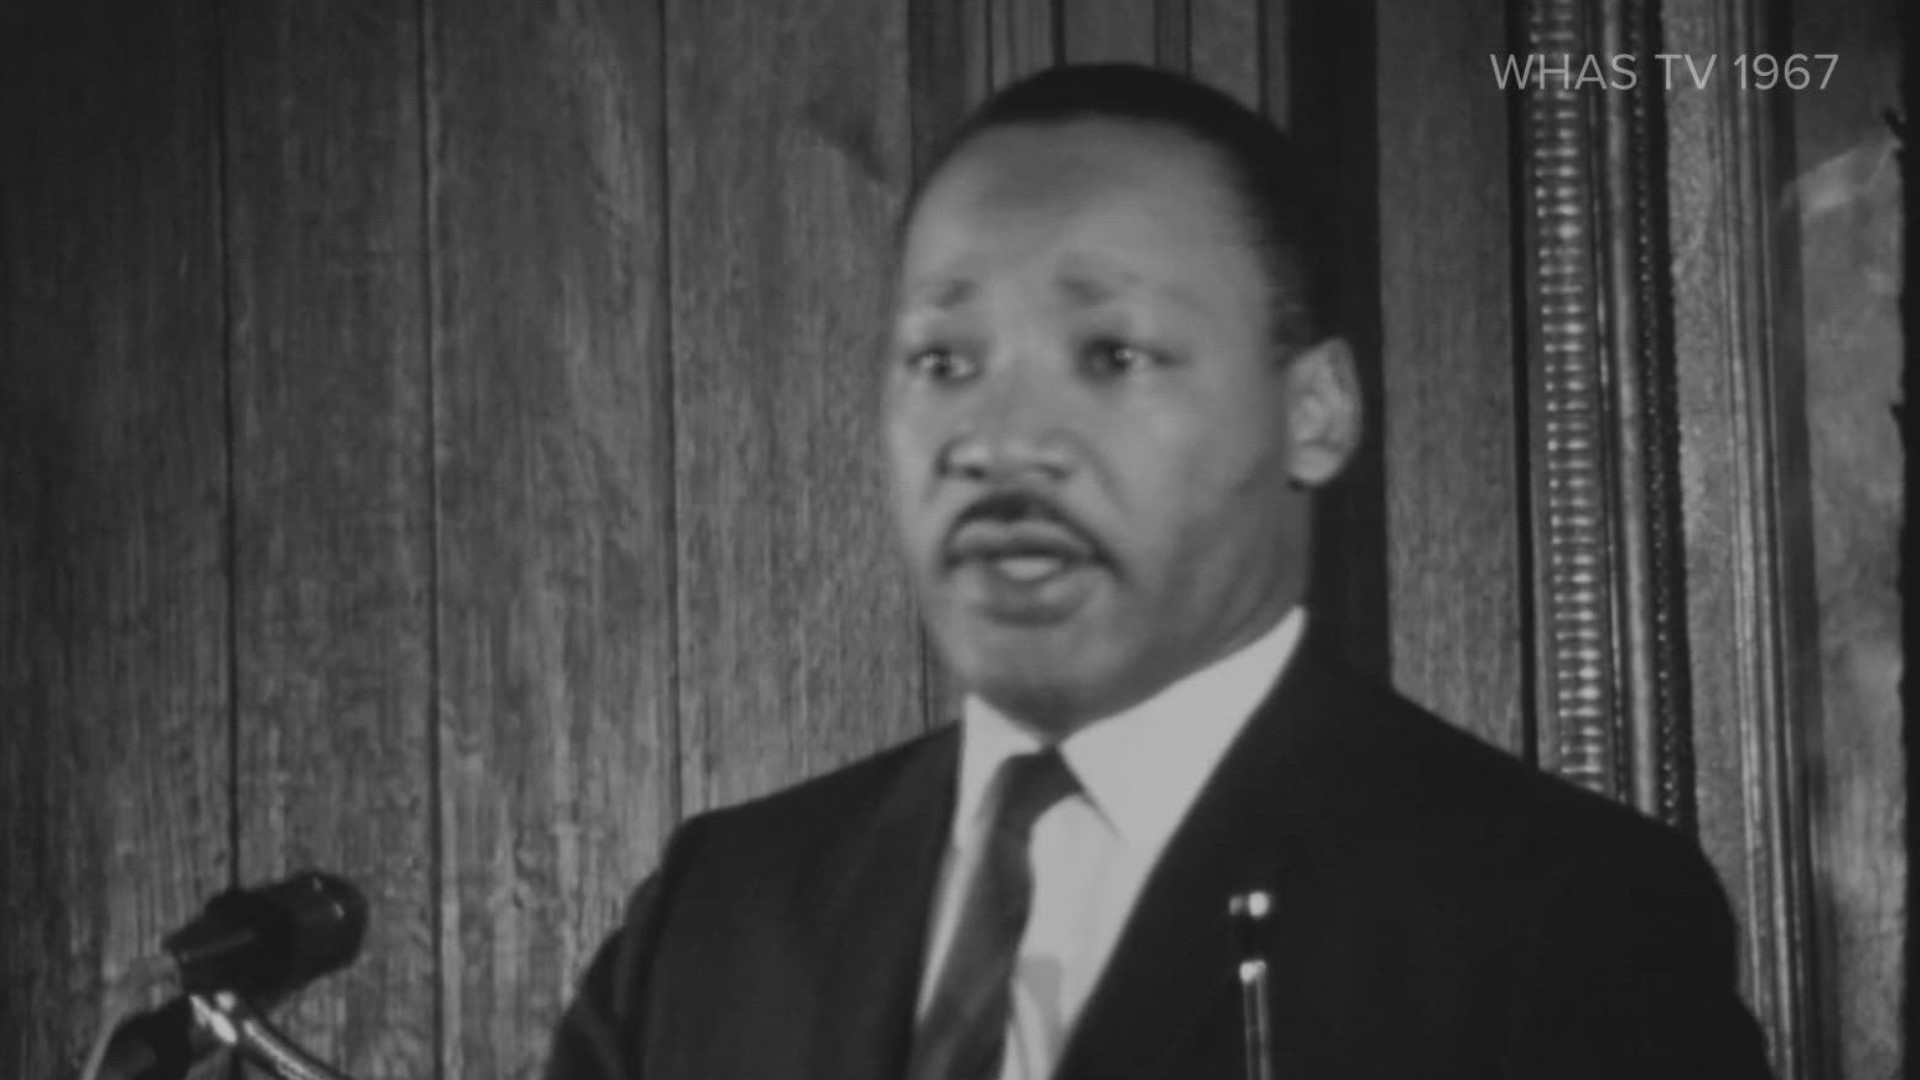 Until two years ago, one very important appearance by Dr. King on the University of Louisville campus was frozen in time, resting in the WHAS-TV archives.